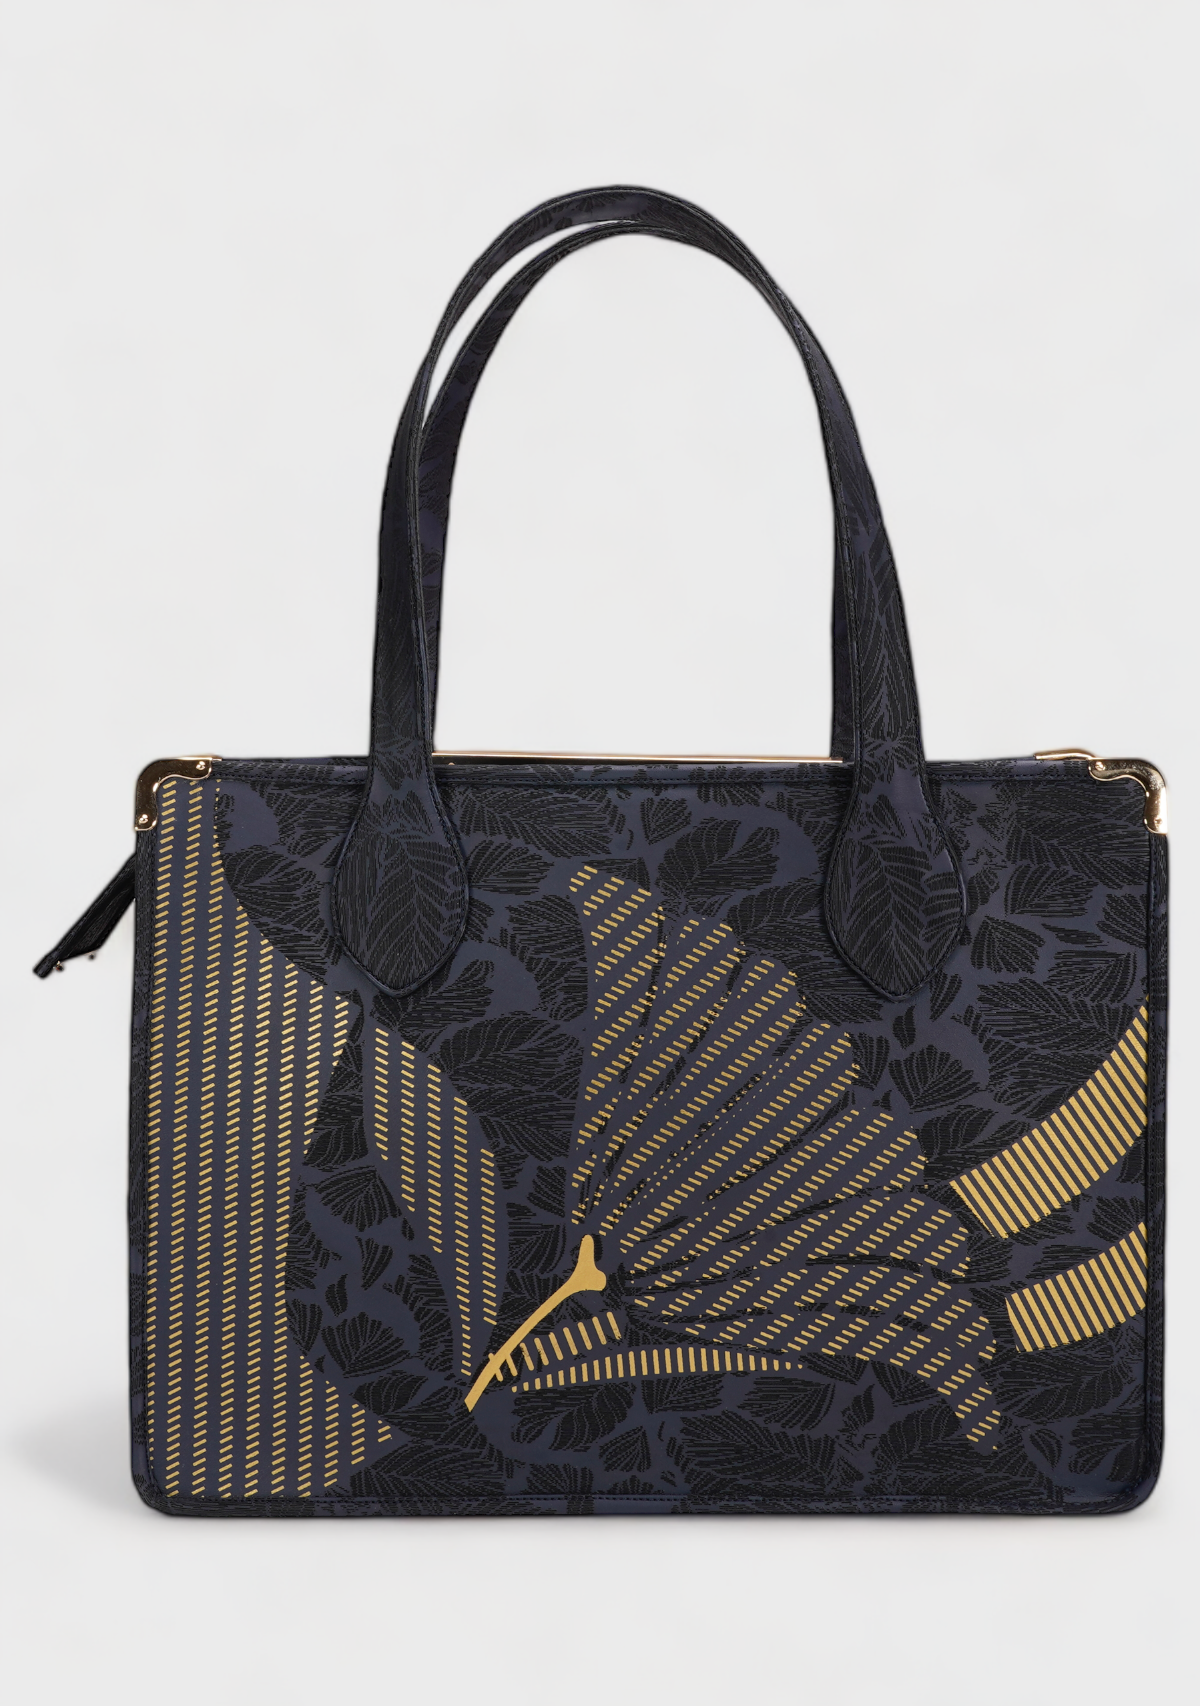 The Sky Engrave Tote Handbags For Women